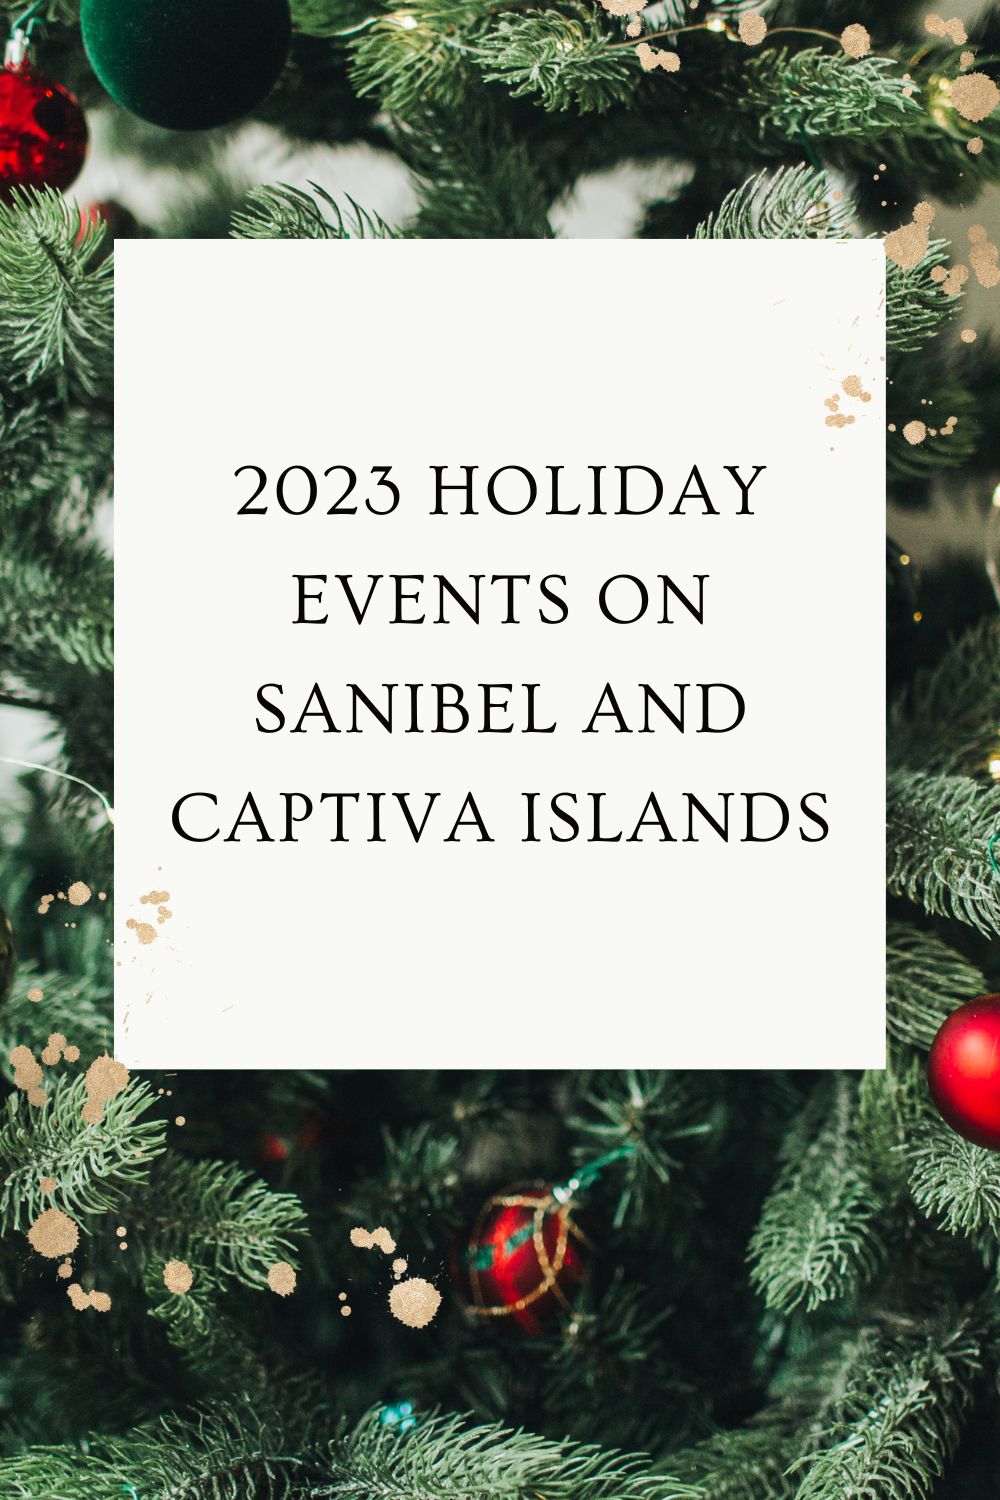 2023 Holiday Events on Sanibel and Captiva Islands